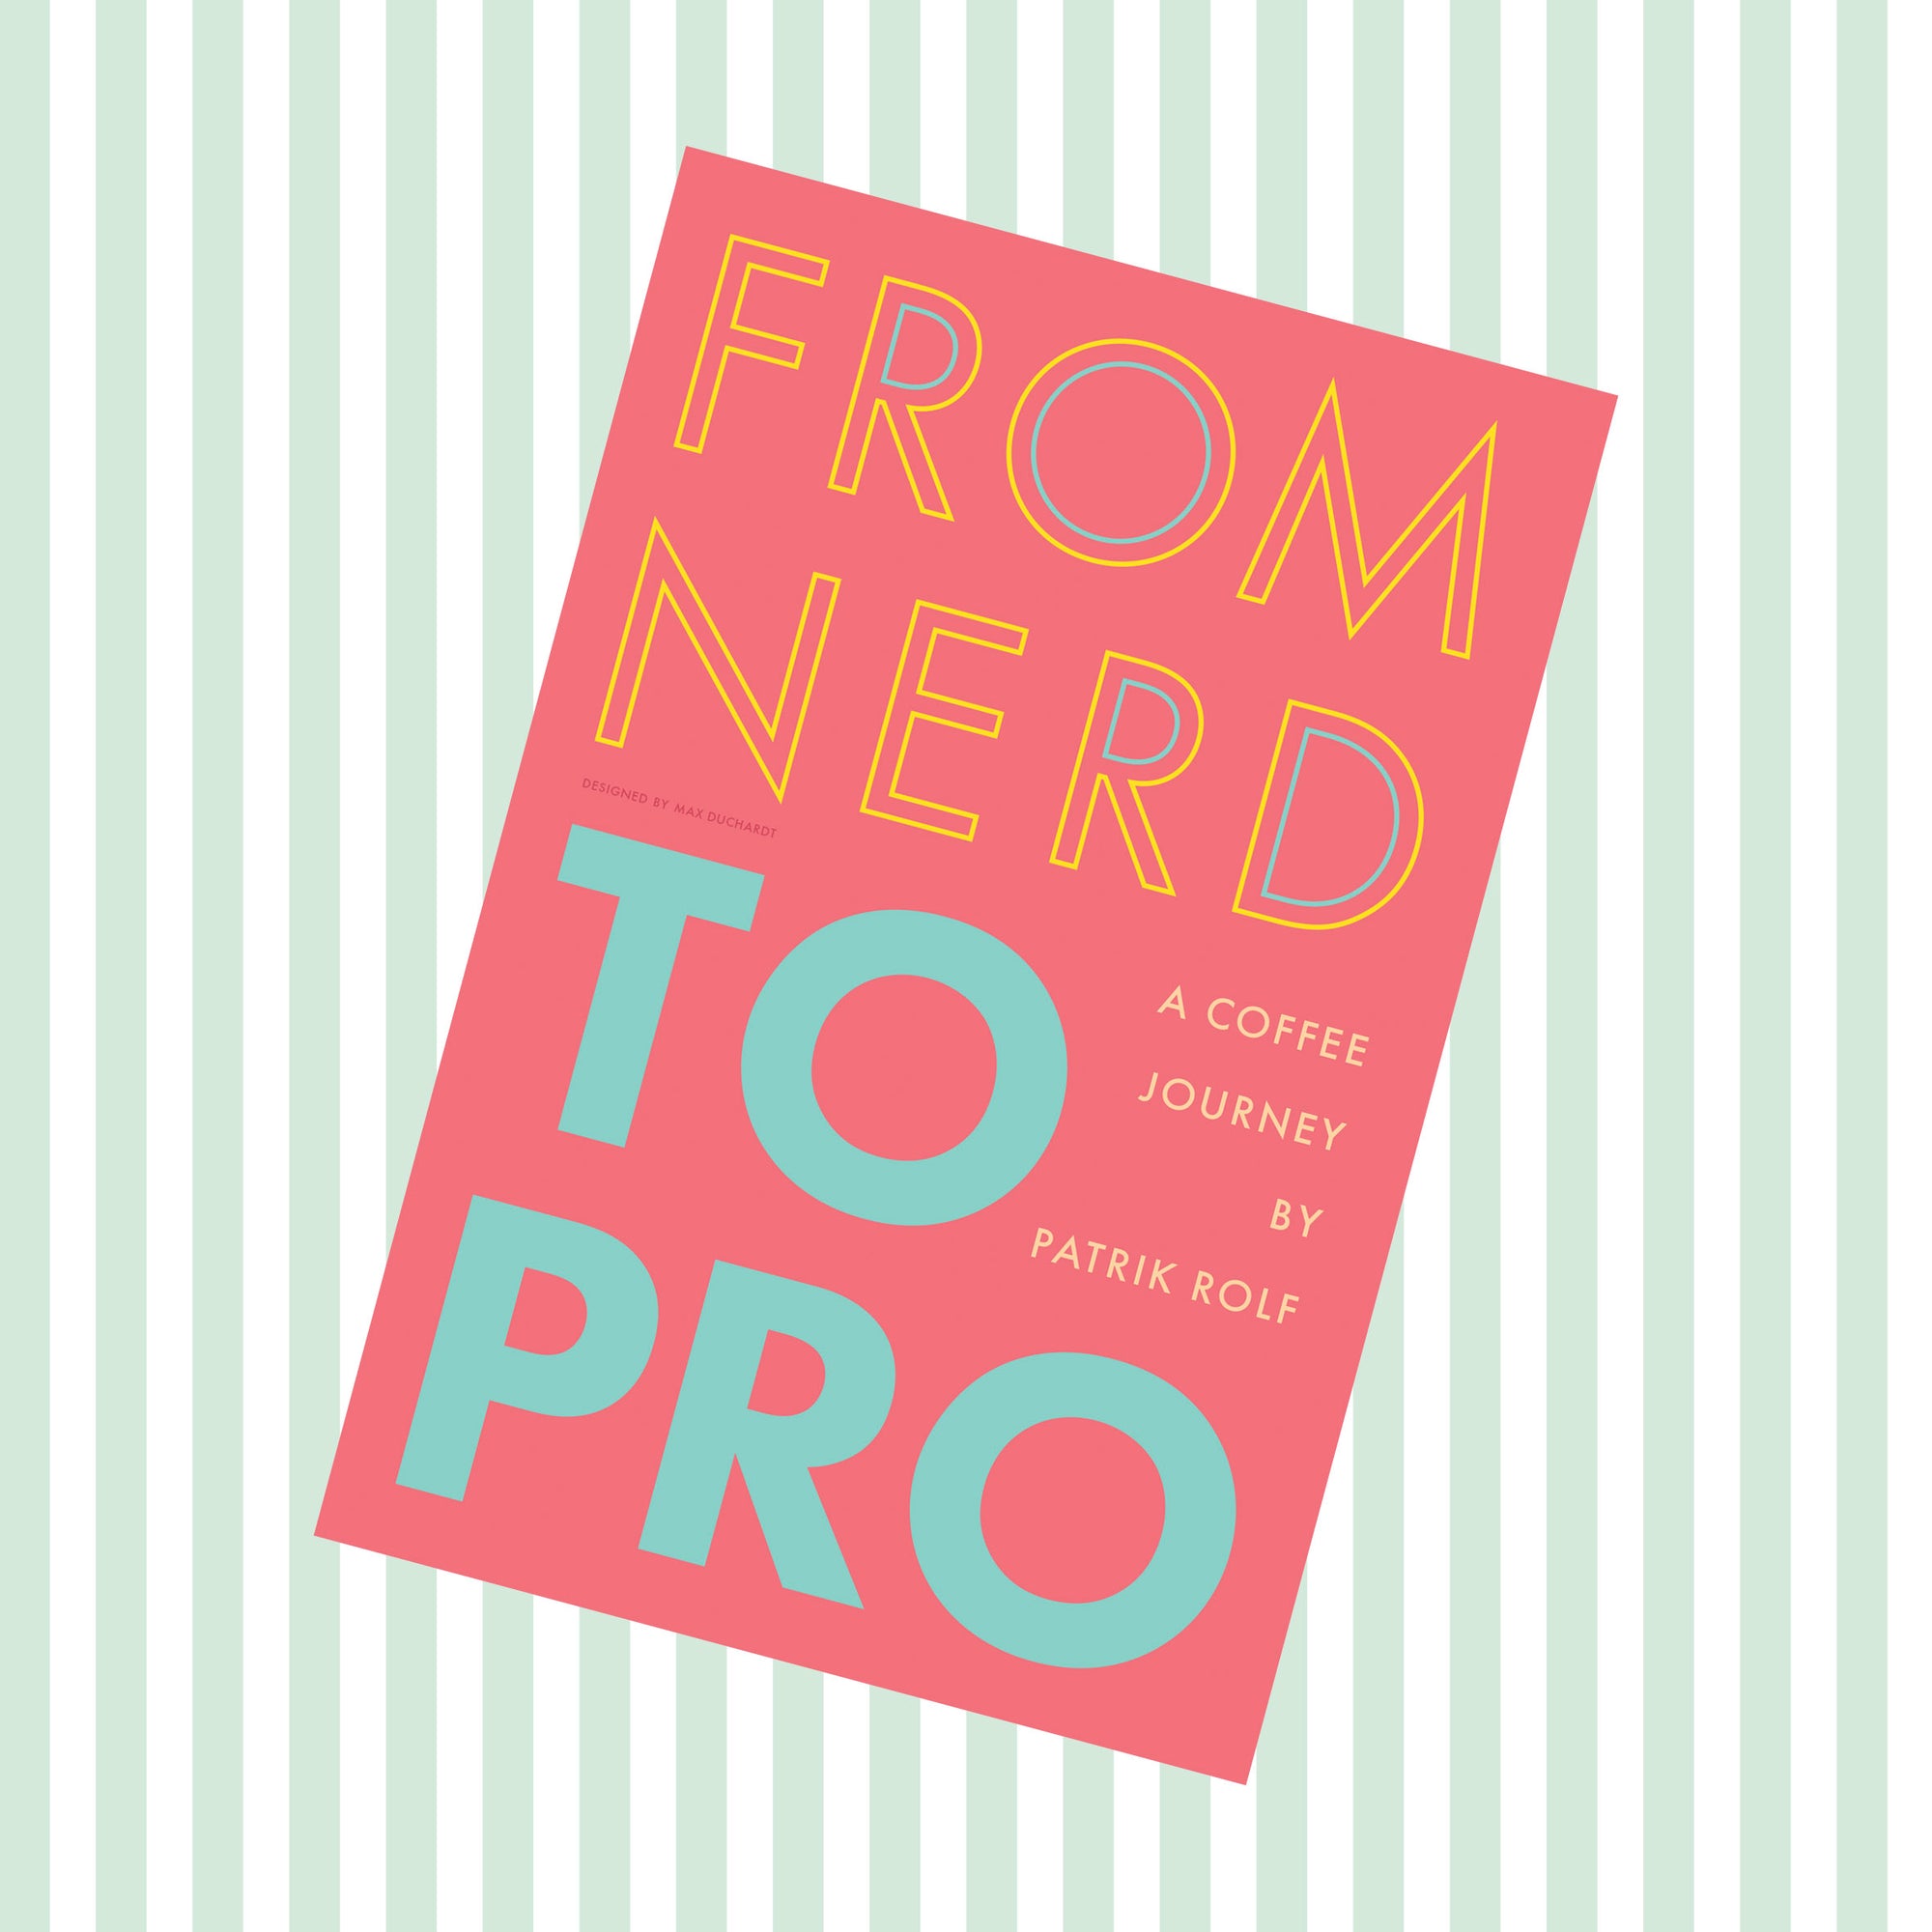 The book: From Nerd To Pro, a coffee journey